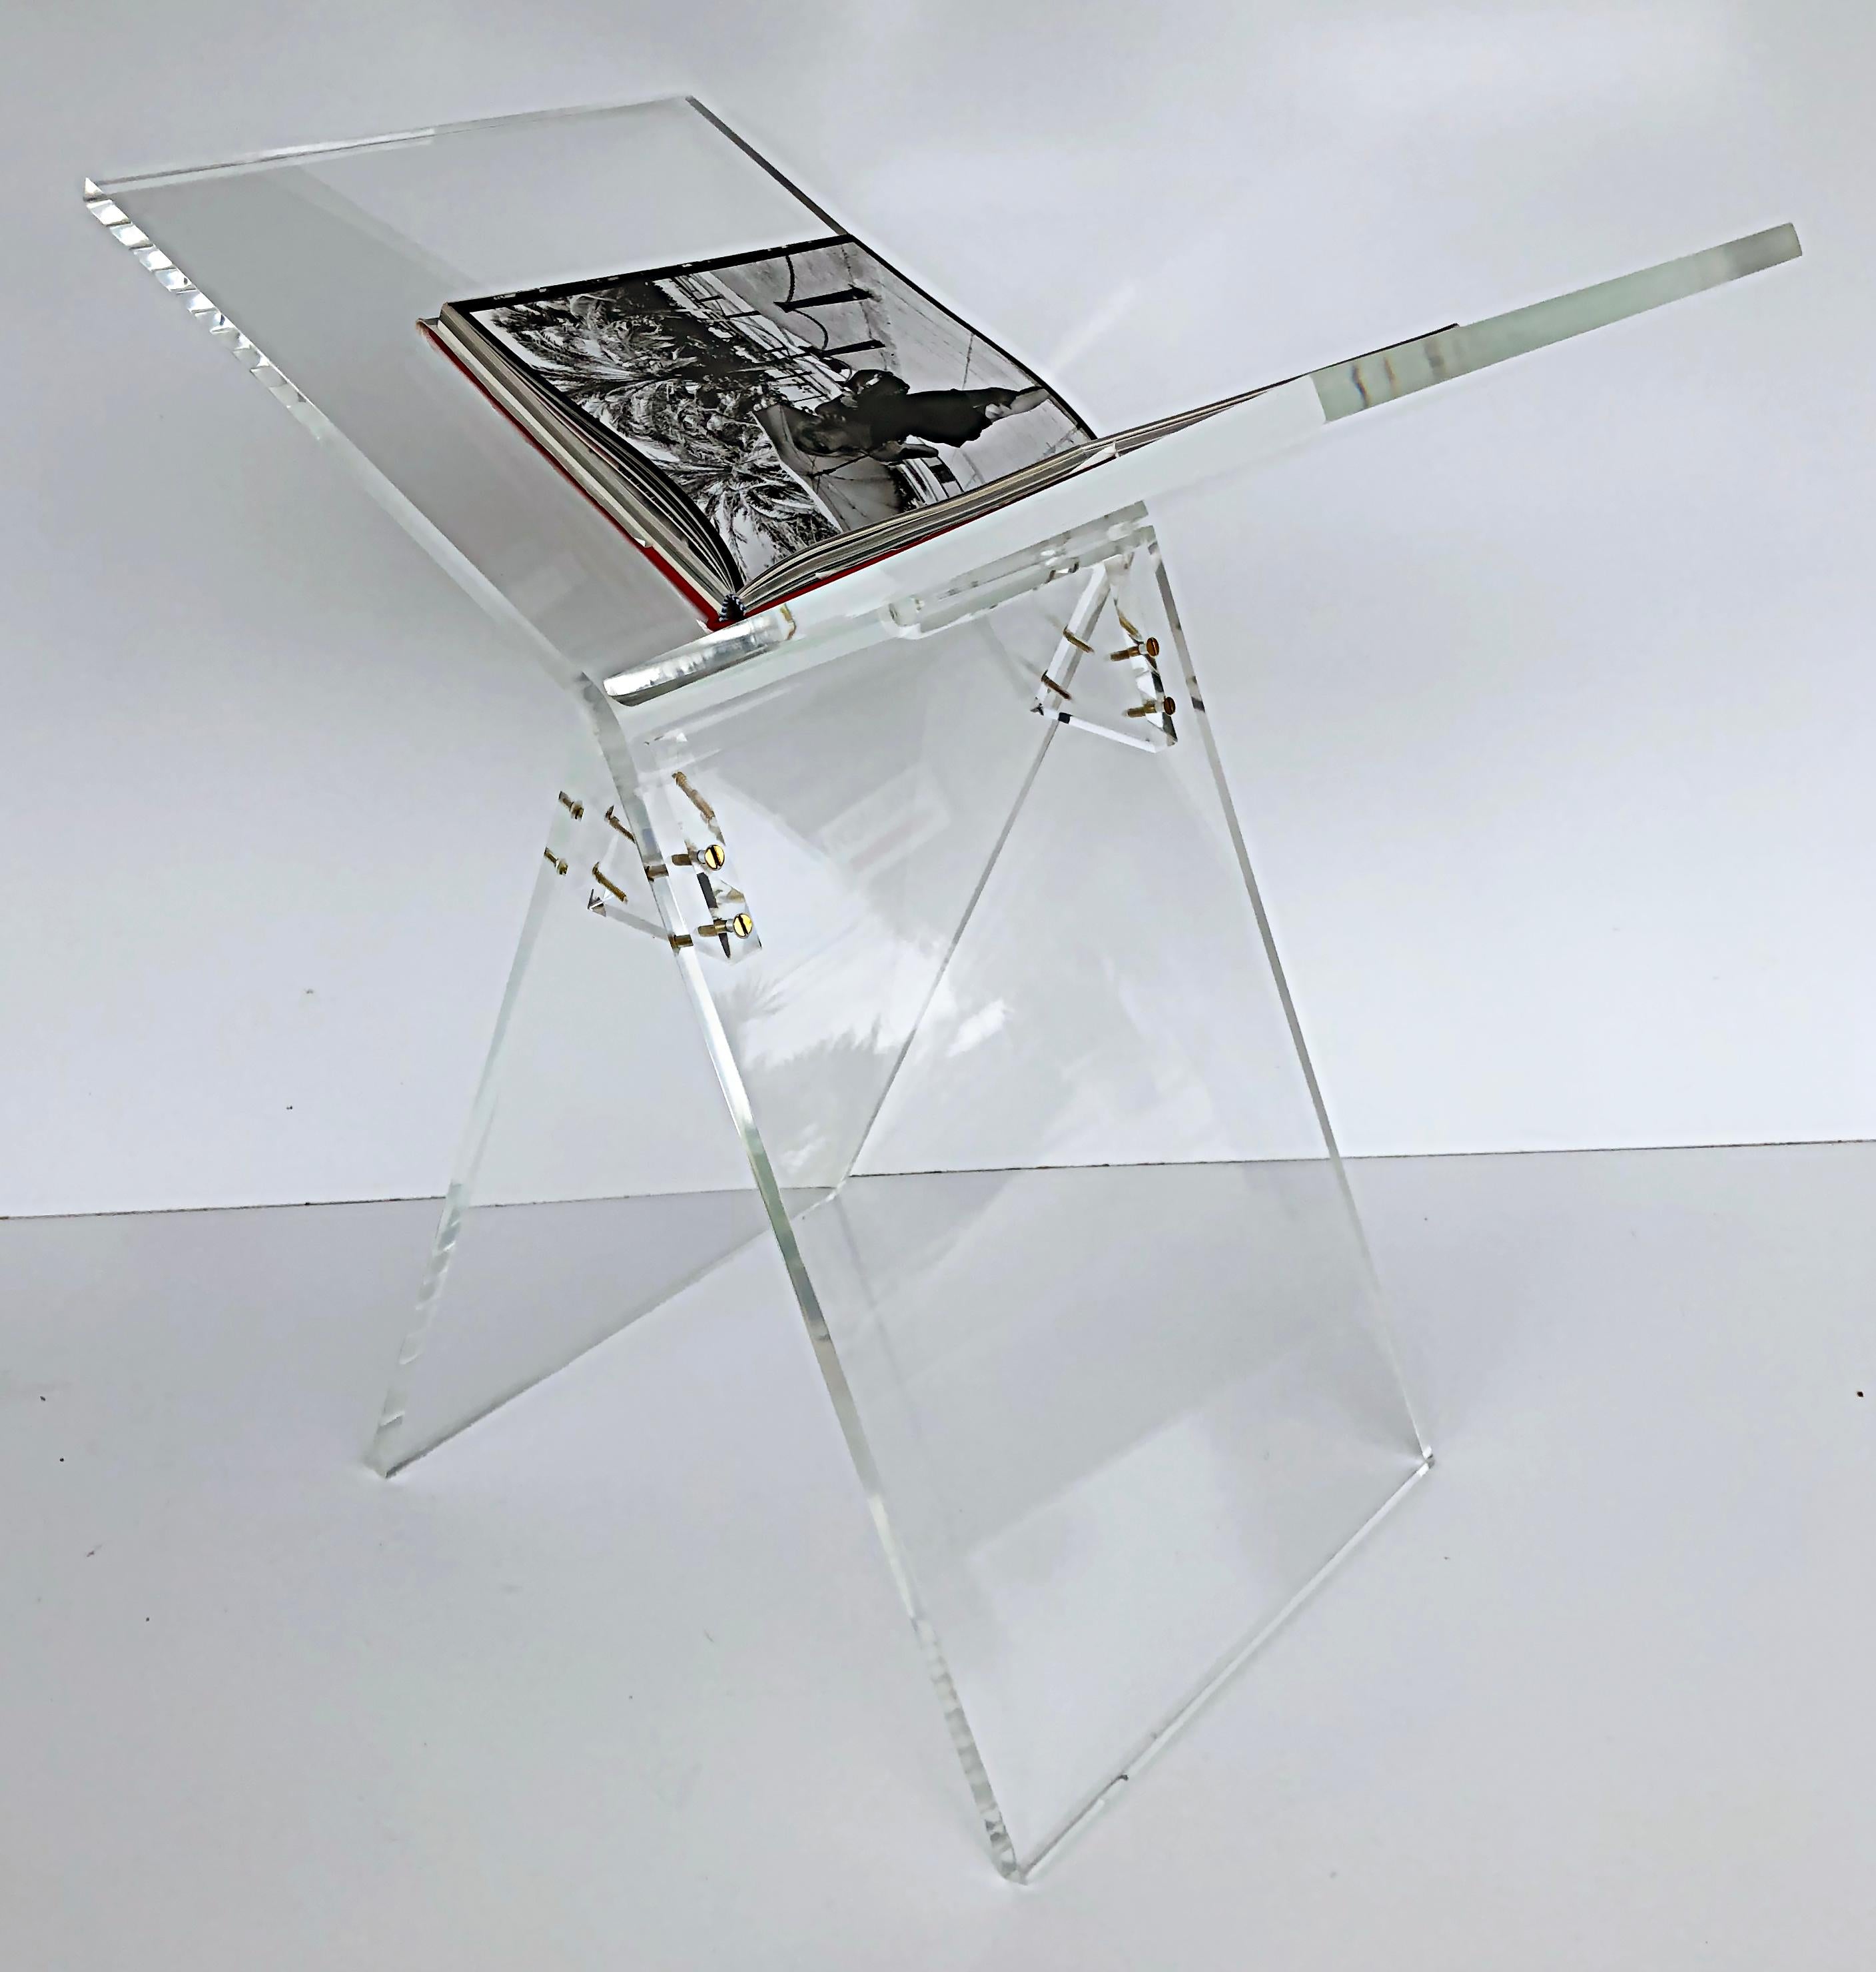 Custom Made Lucite Oversized coffee-table book stand for Taschen Sumos

This large, free-standing lucite book stand allows you to display and view oversized specialty books as seen at booksellers, Taschen and Assouline. The stand is finished with